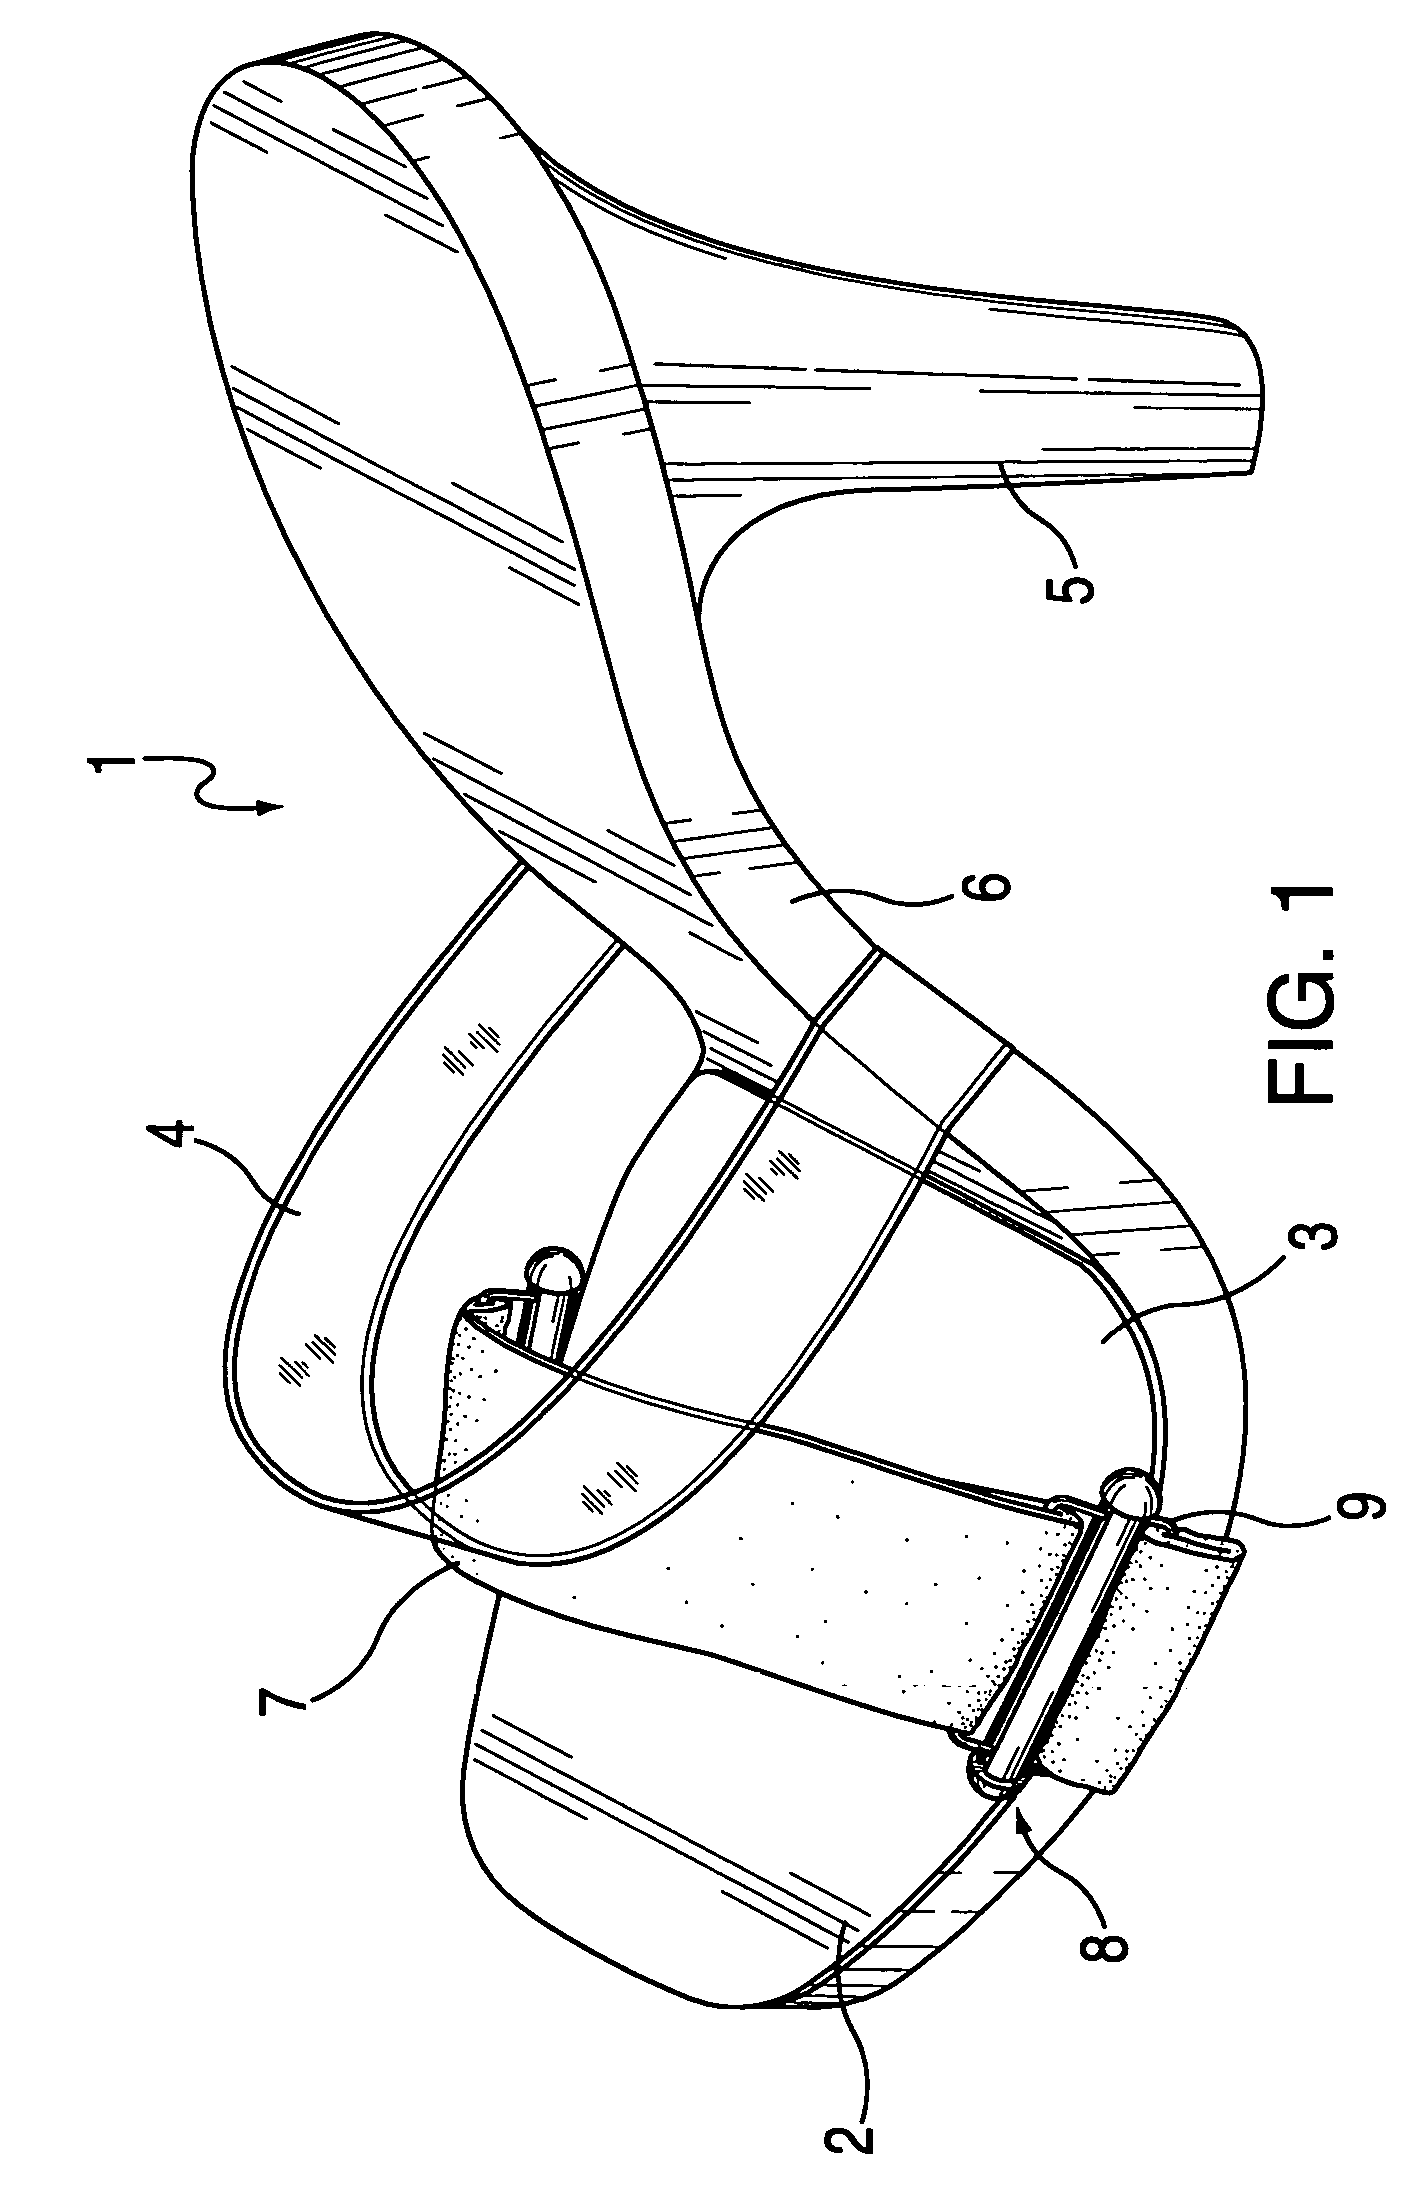 Locking mechanism for securing detachable shoe uppers